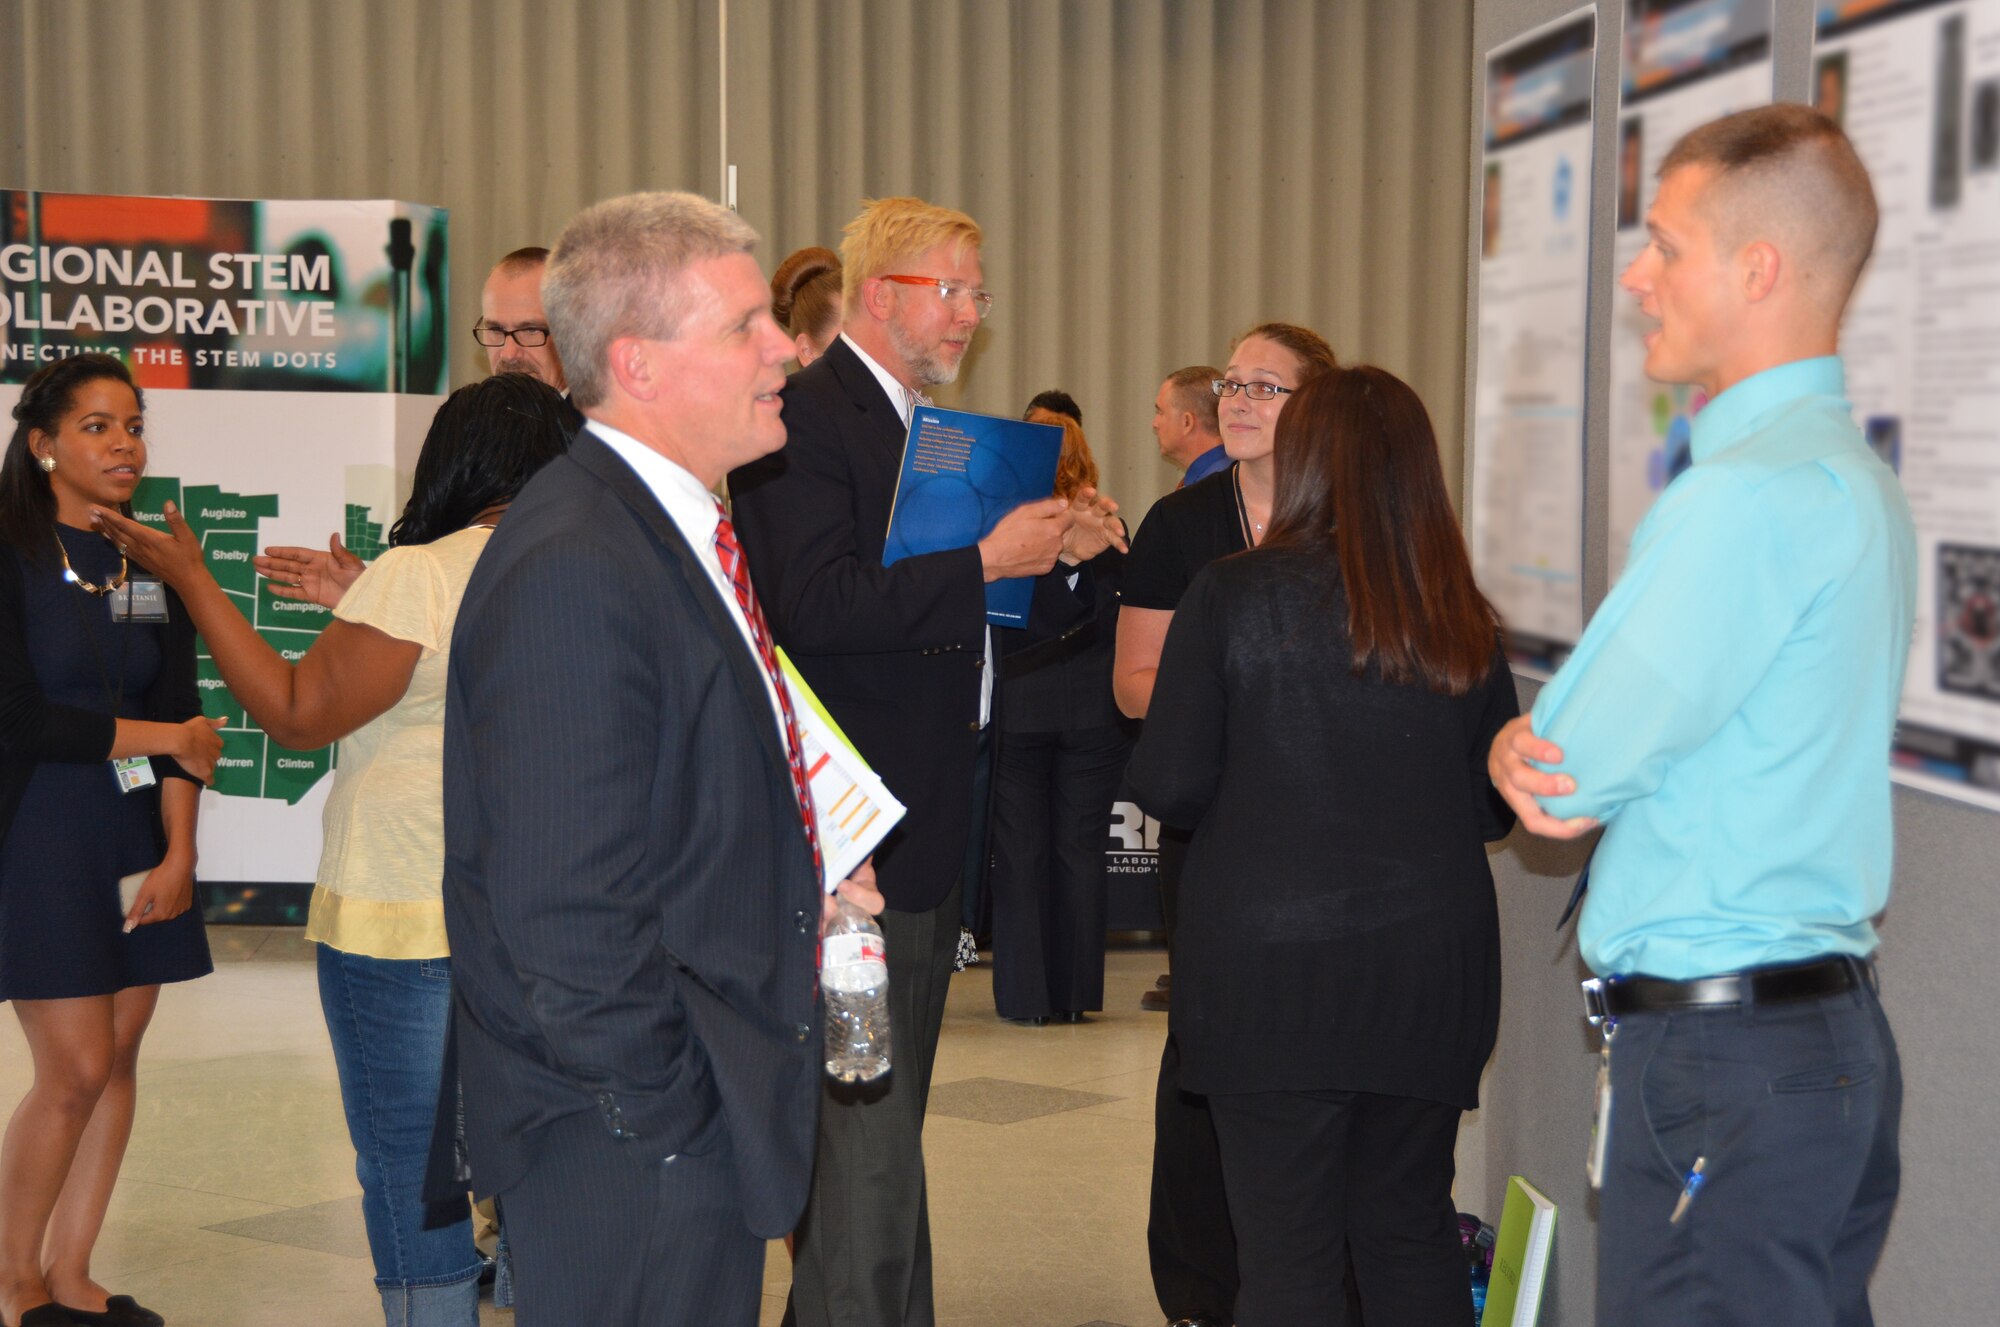 AFRL student research Brian Shivers (right) discusses his poster with Mr. Thomas Lockhart, Director of the AFRL Materials and Manufacturing Directorate, during the August 5 summer student poster session and tour.  (AFRL photo by Anise Simpson)